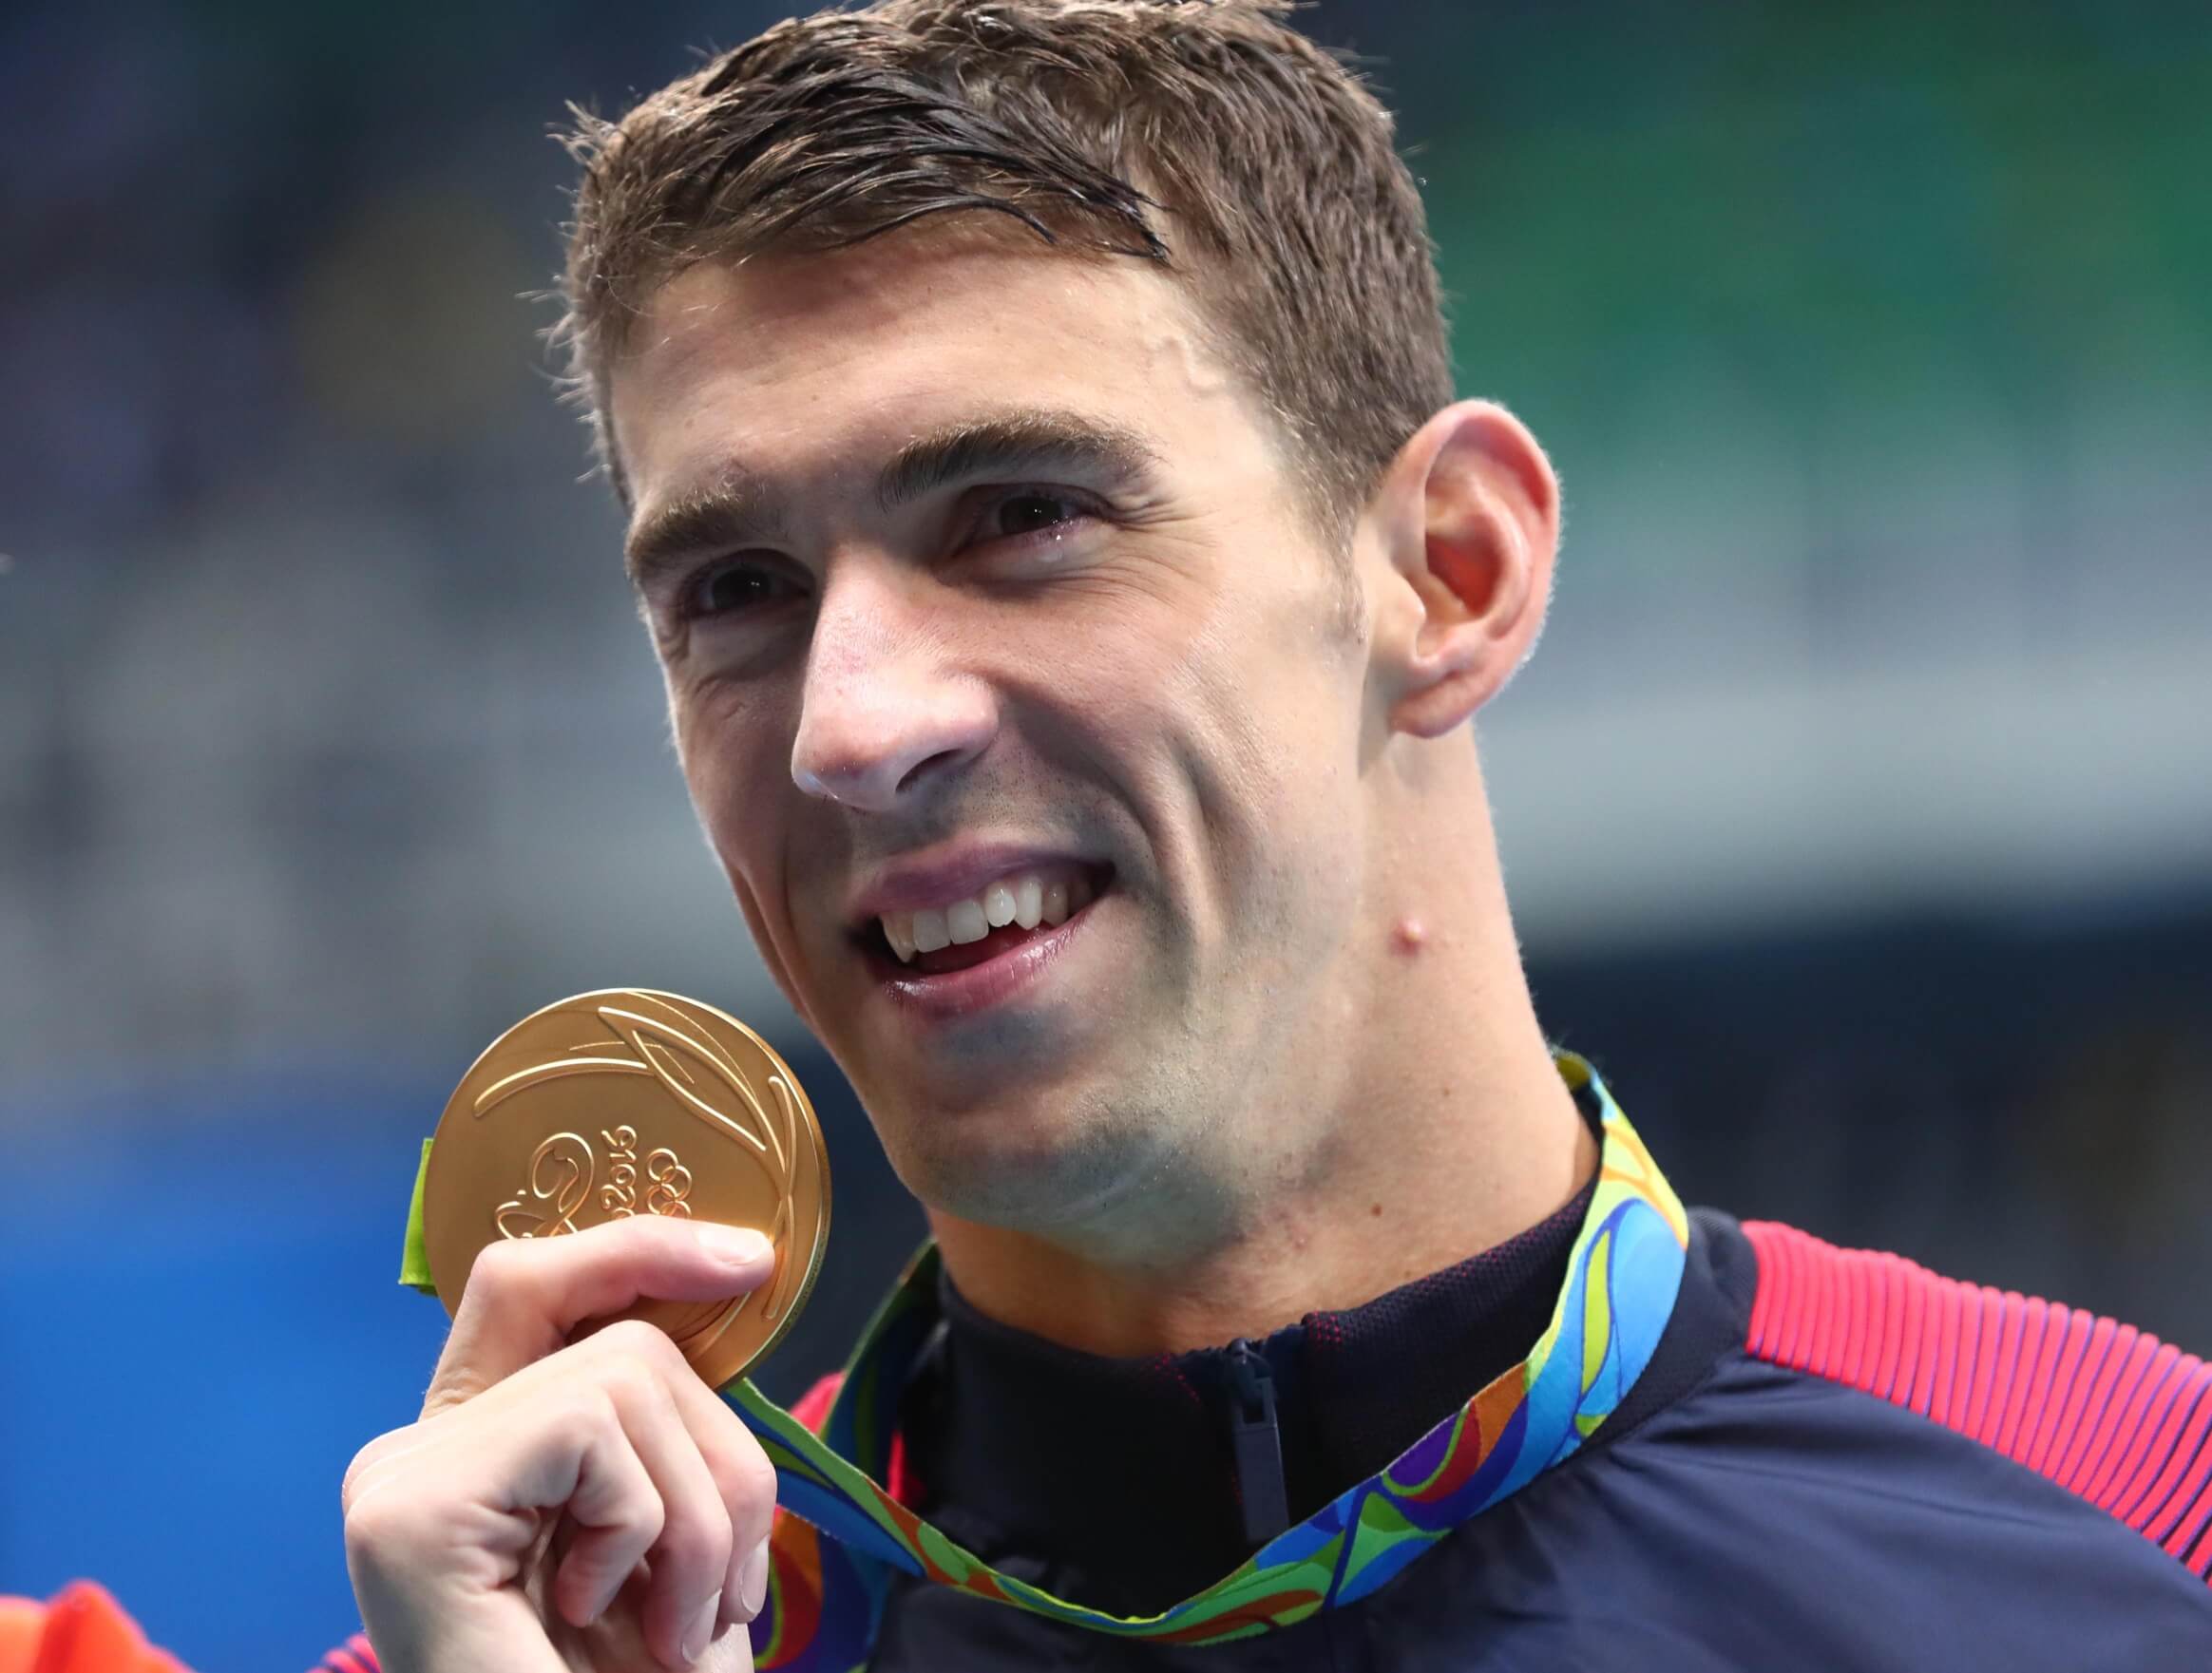 Win the gold medal. Michael Phelps USA.